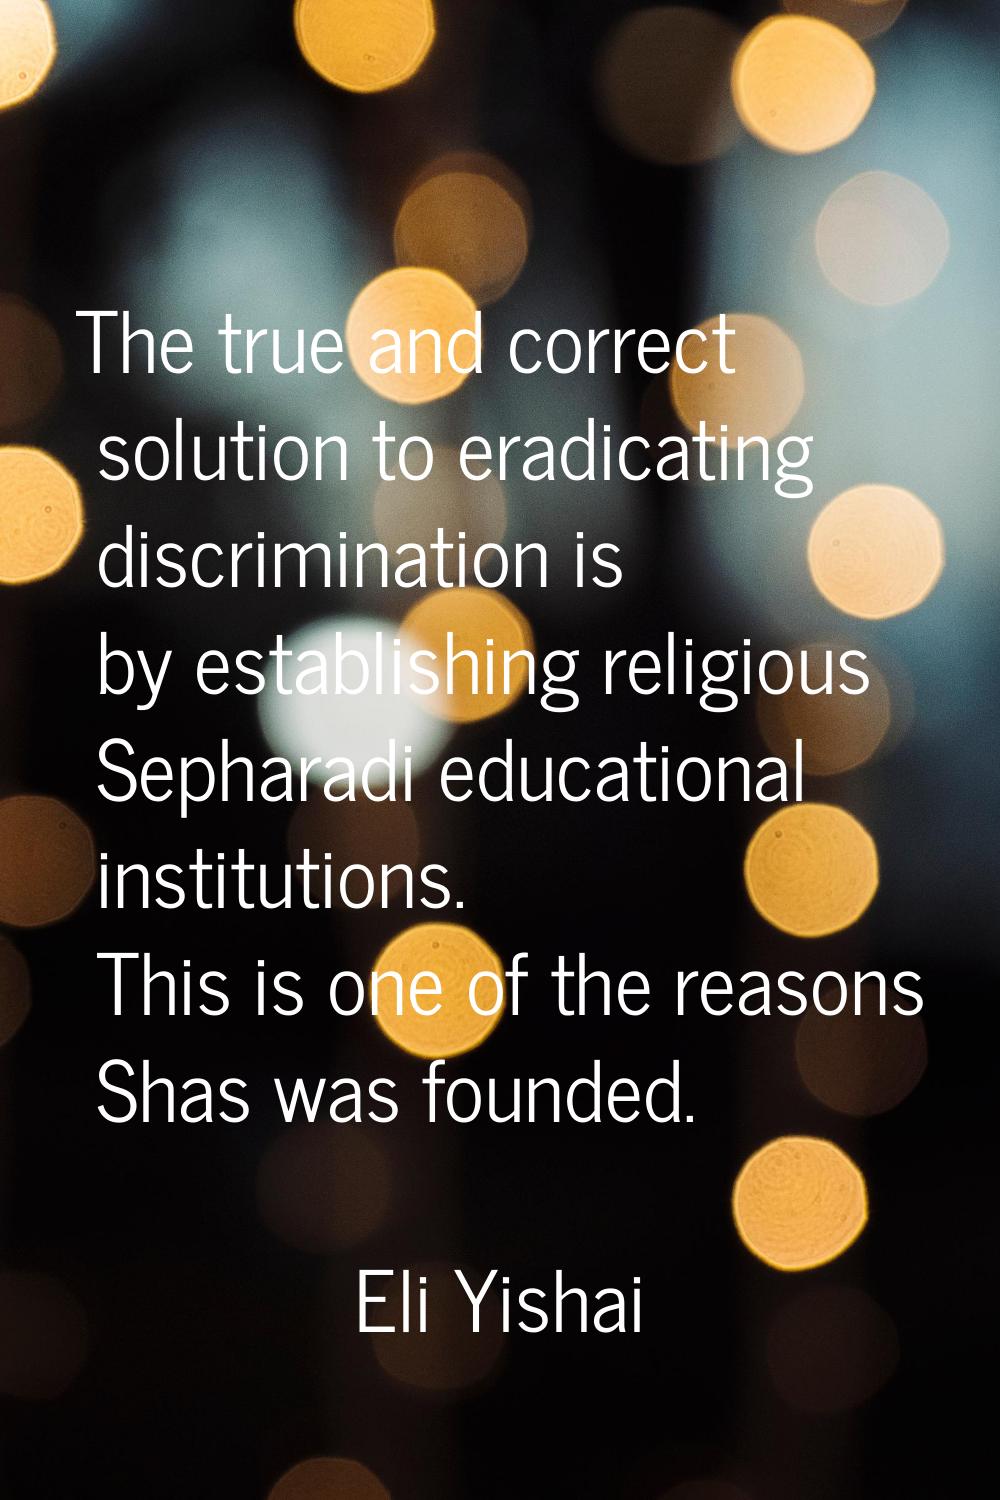 The true and correct solution to eradicating discrimination is by establishing religious Sepharadi 